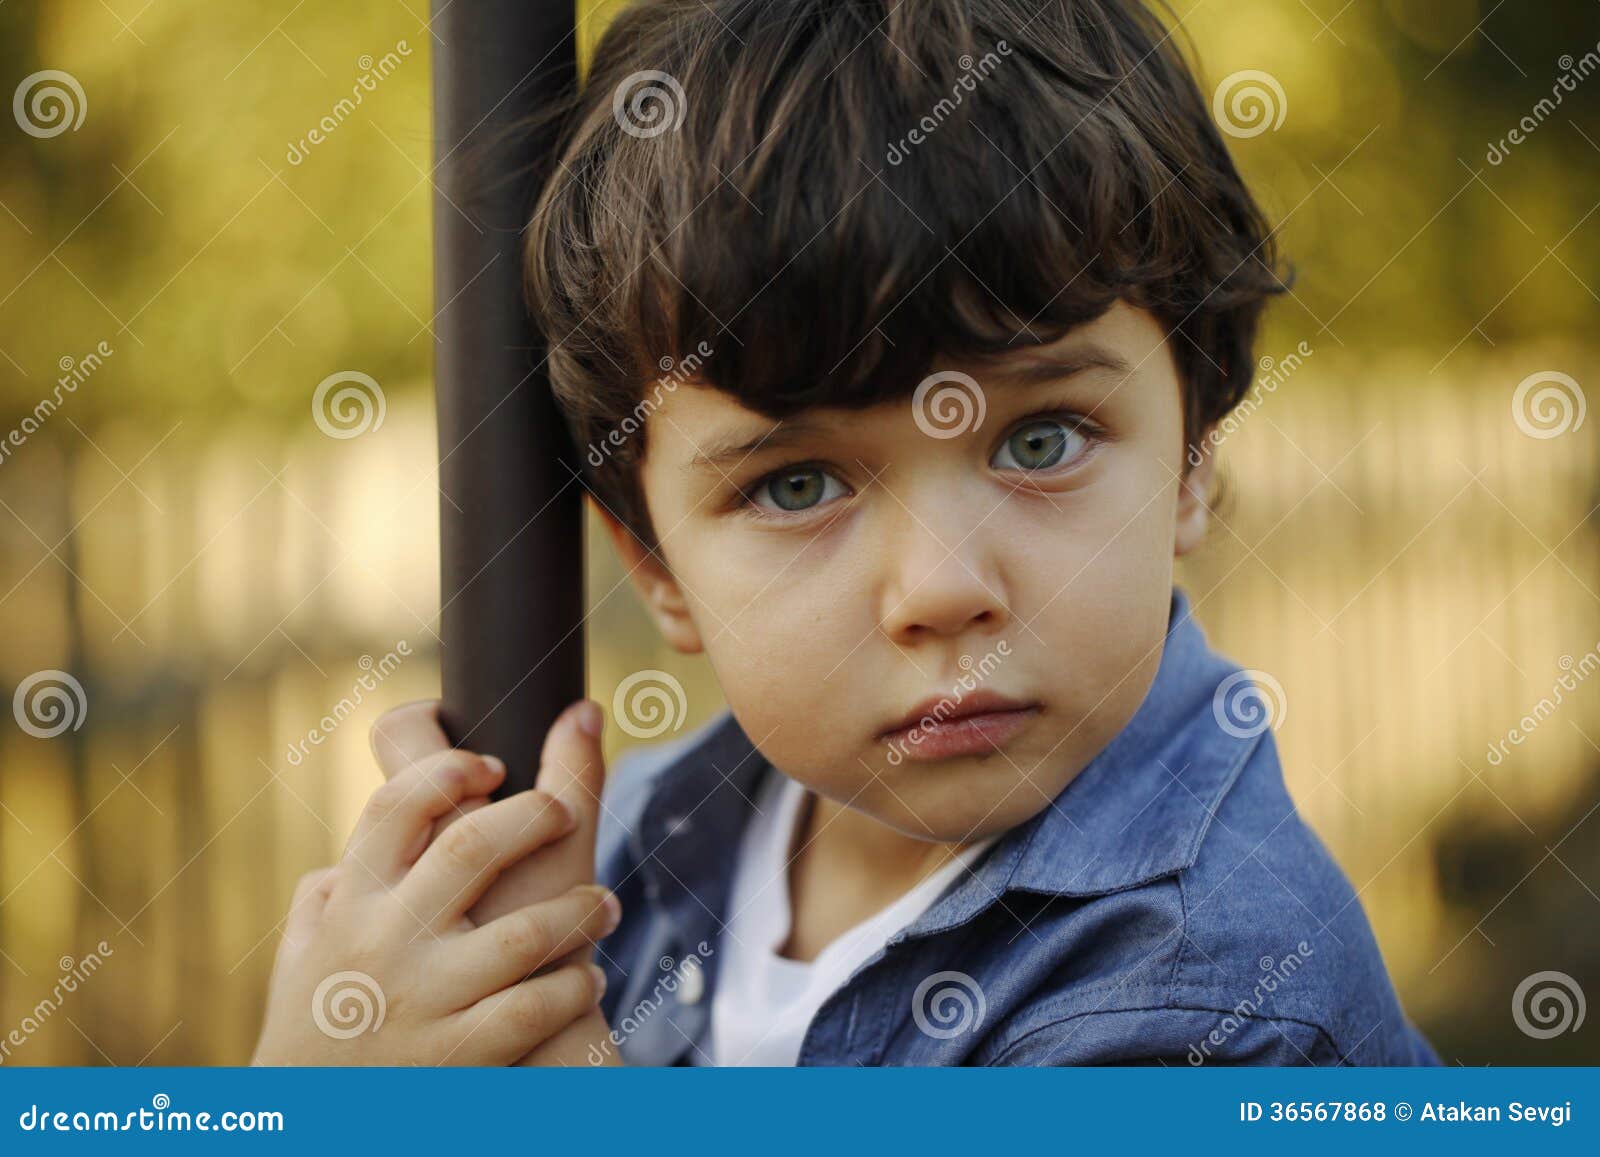 Portrait Of A Little Boy With Blue Eyes And Cute Face Stock